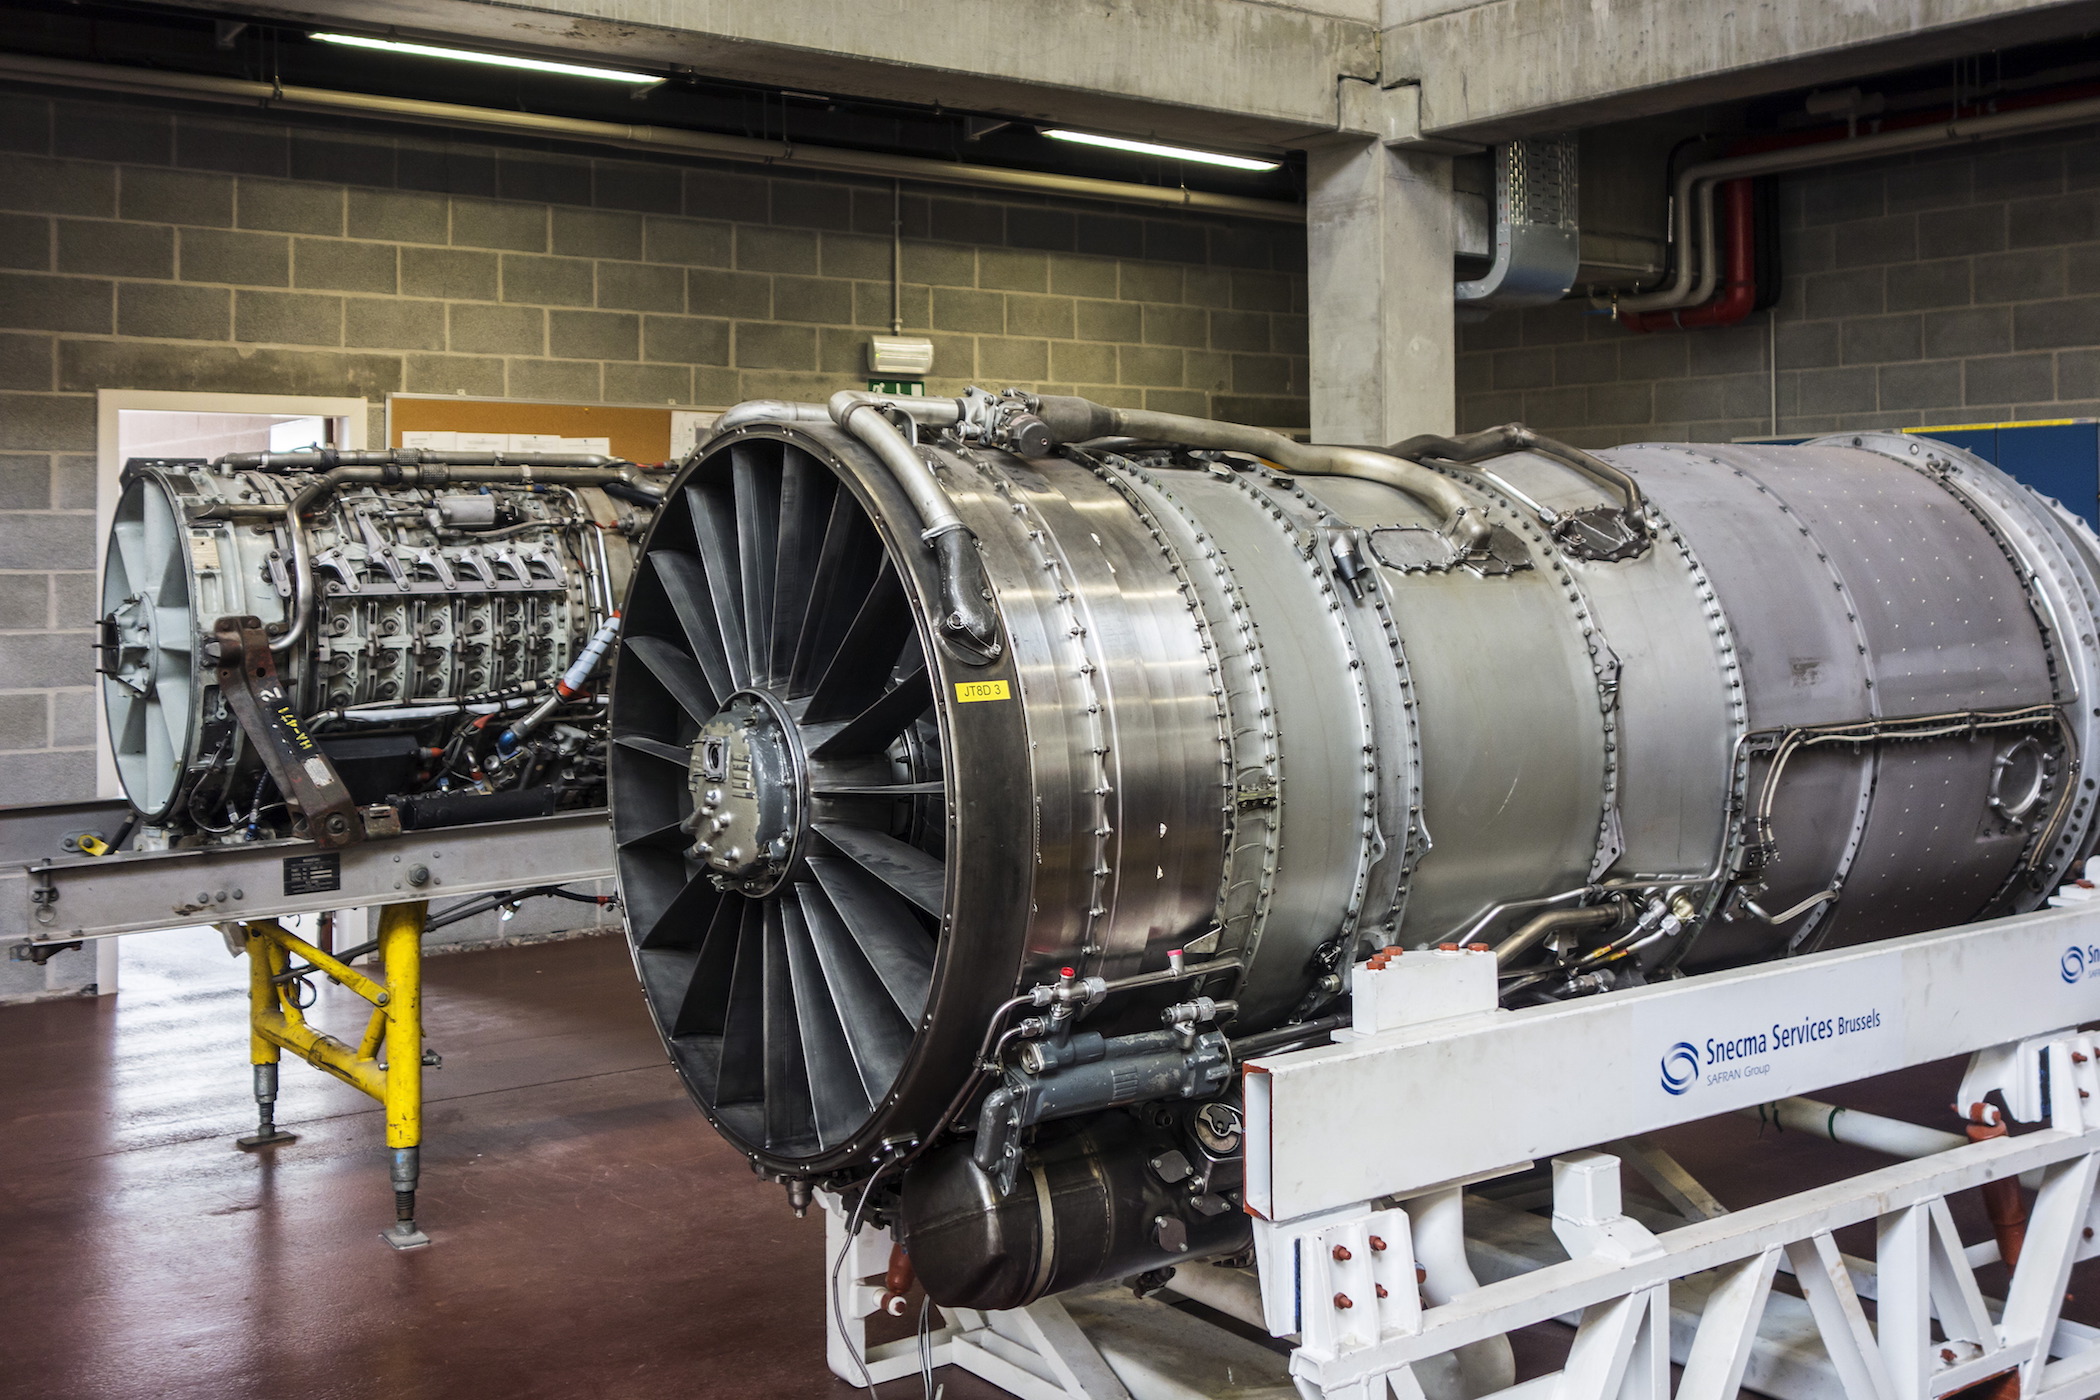 Jet engines for teaching purposes in workshop of the Vlaams Luchtvaartopleidingscentrum / VLOC / Flemish aviation training center in Ostend, Belgium. The company Magnix hopes to soon replace plane engines with an electric motor. (Photo by: Arterra/UIG via Getty Images)